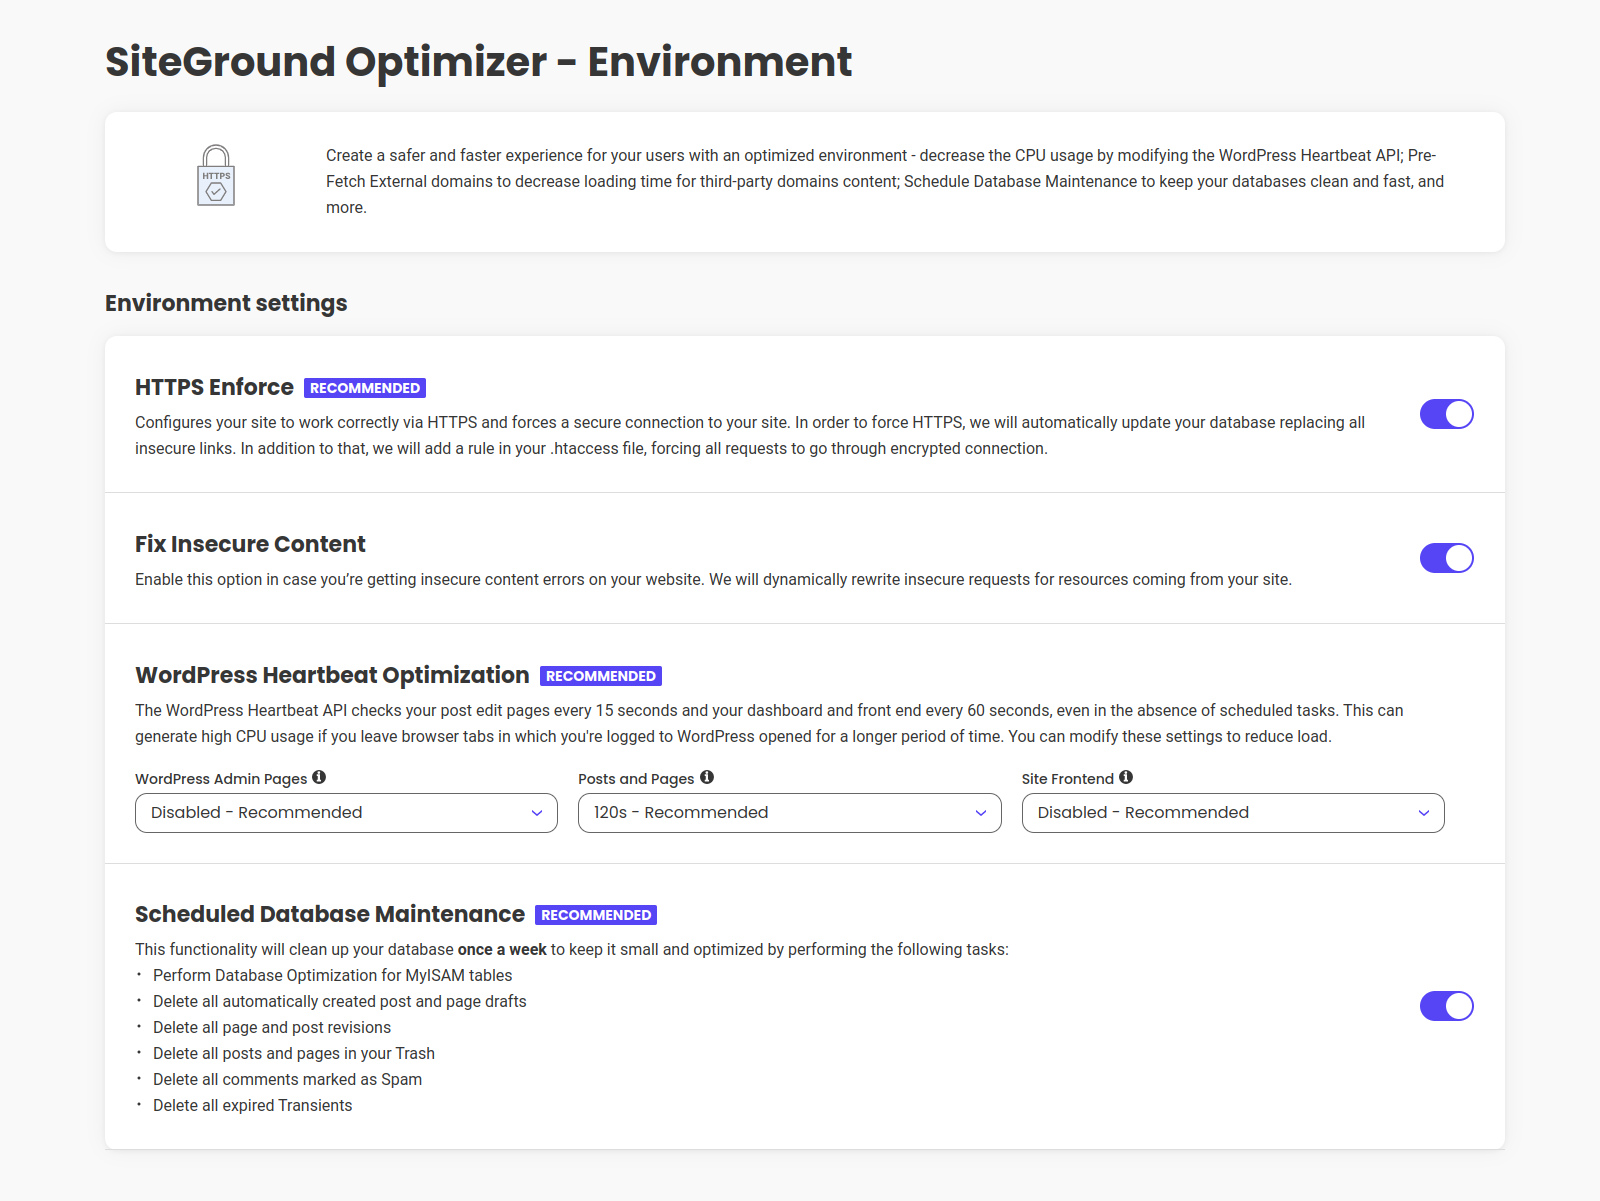 The SiteGround Optimizer Environment Page, you can force HTTPS for your site, tweak the WordPress Heartbeat Optimization, pre-fetch external domains and enable the Database Maintenance.